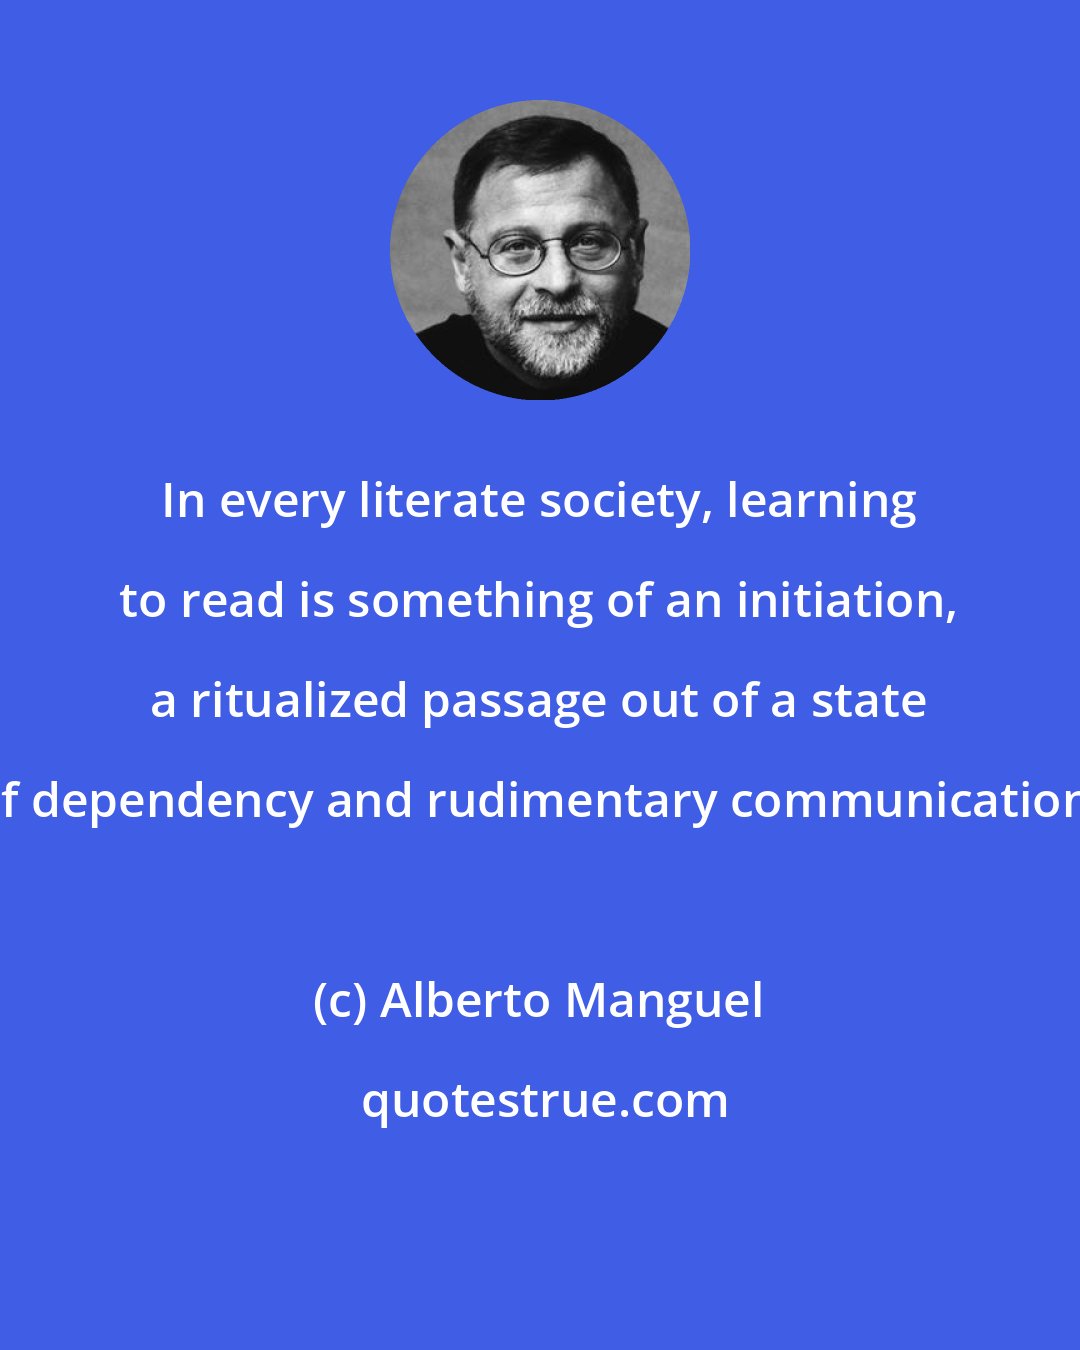 Alberto Manguel: In every literate society, learning to read is something of an initiation, a ritualized passage out of a state of dependency and rudimentary communication.